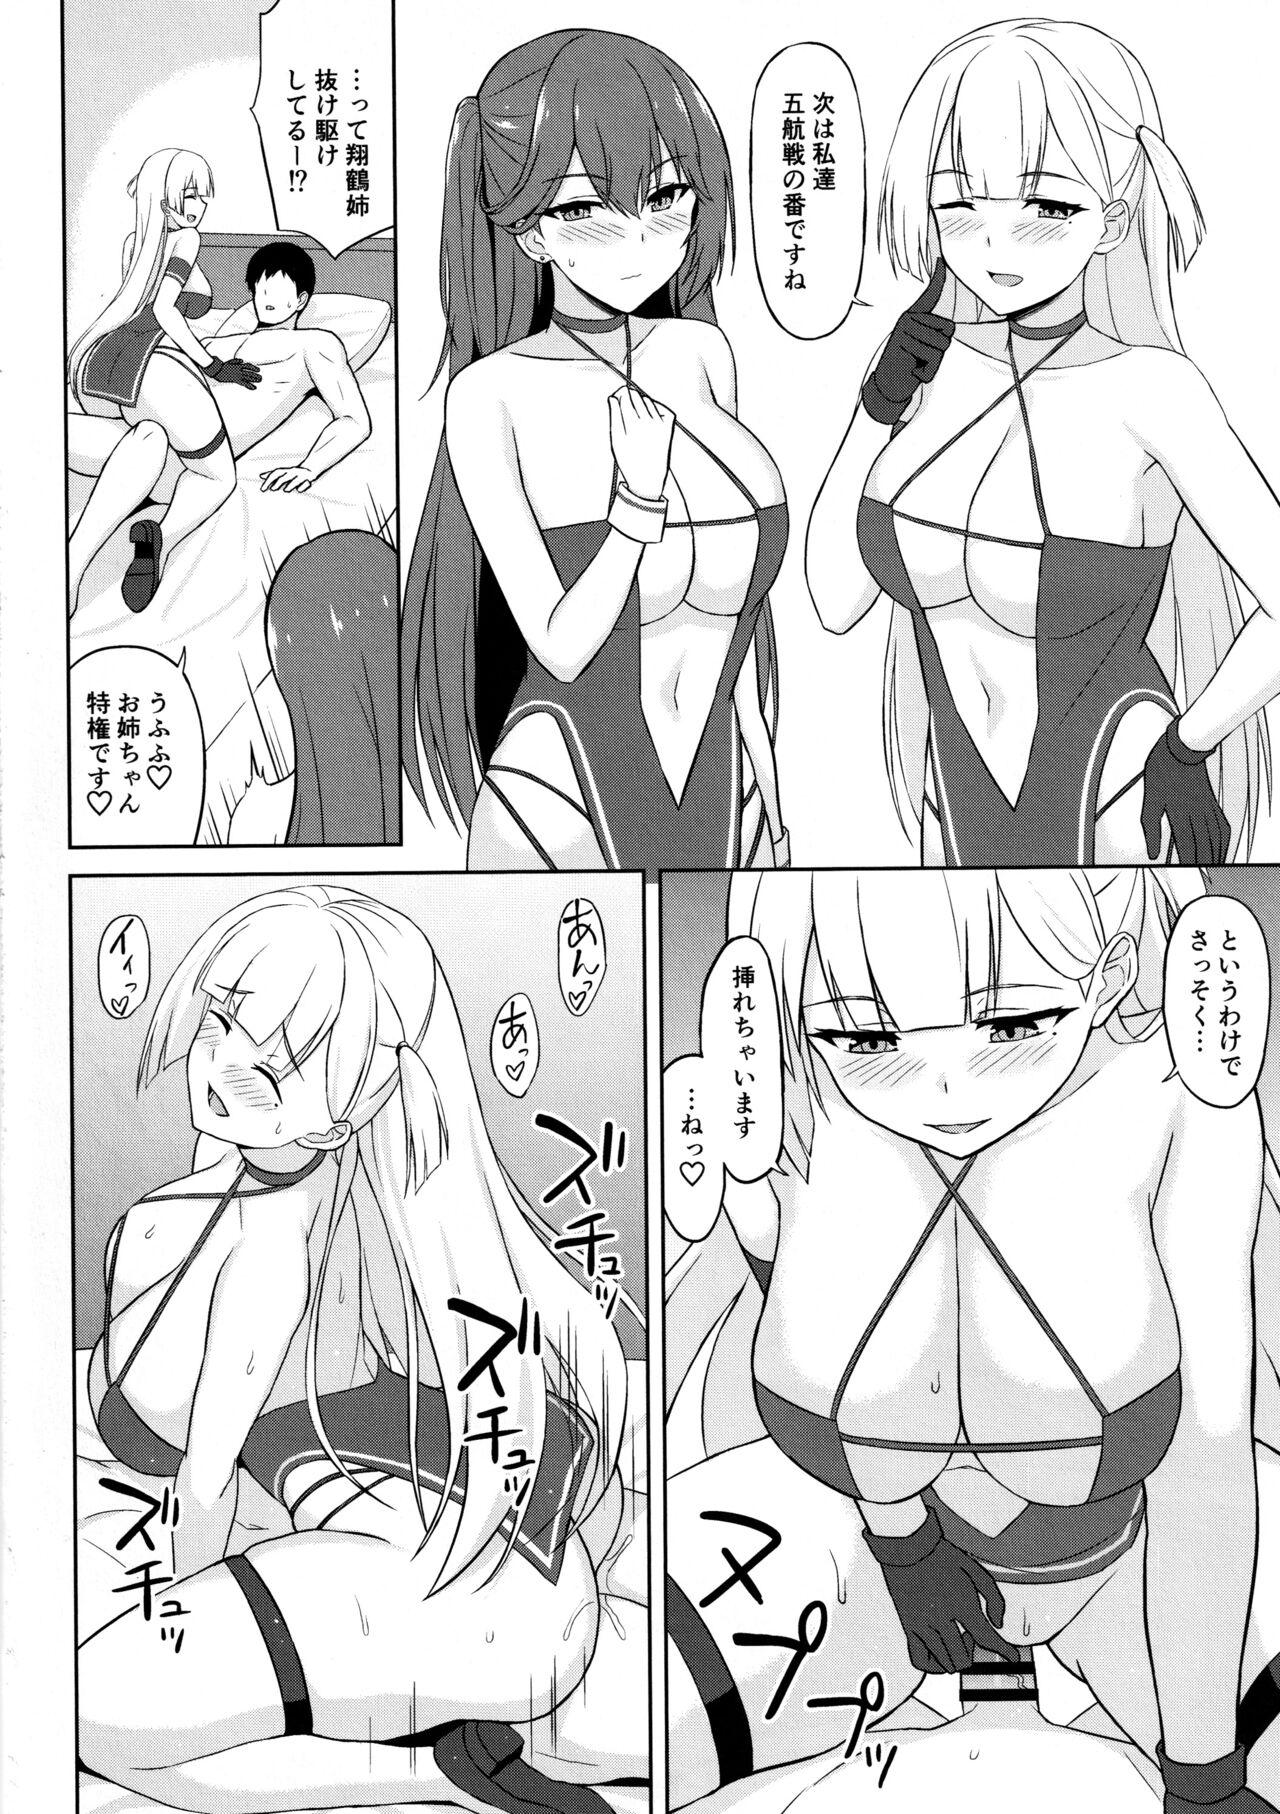 Boy Girl Juuou Race Queens 2 - Azur lane Anal Licking - Page 9